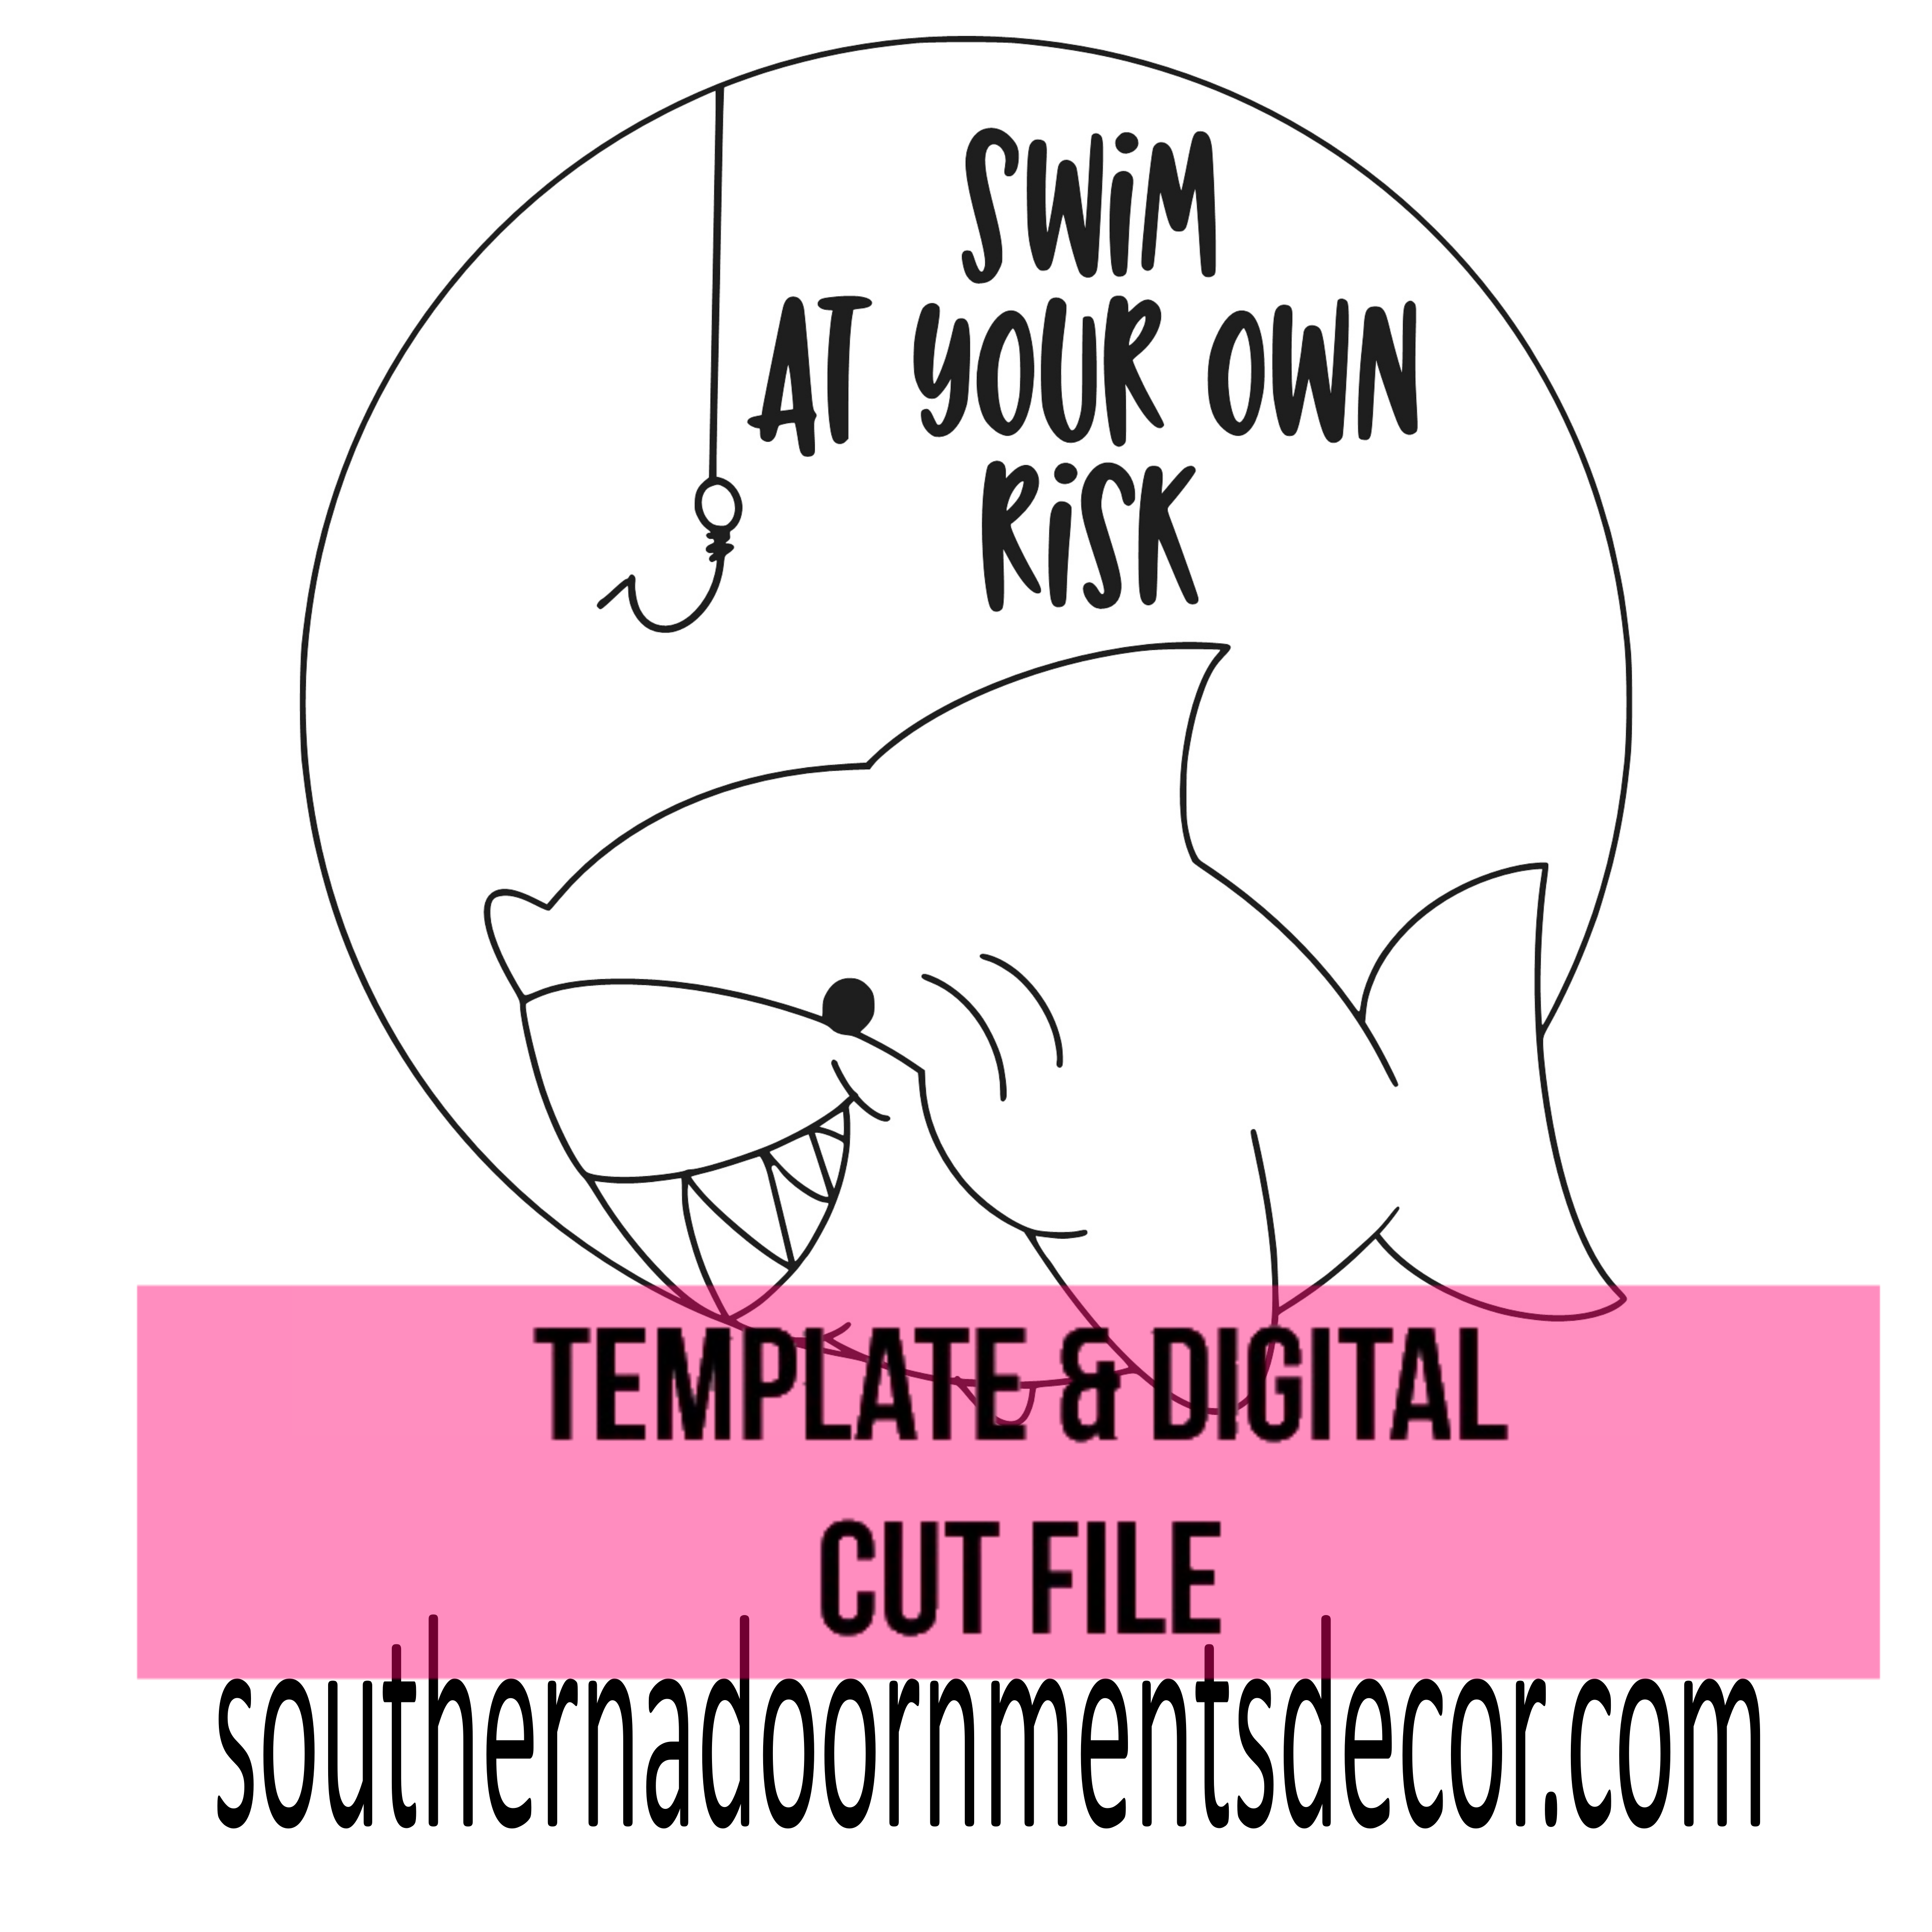 Swim At Your Own Risk Template & Digital Cut File